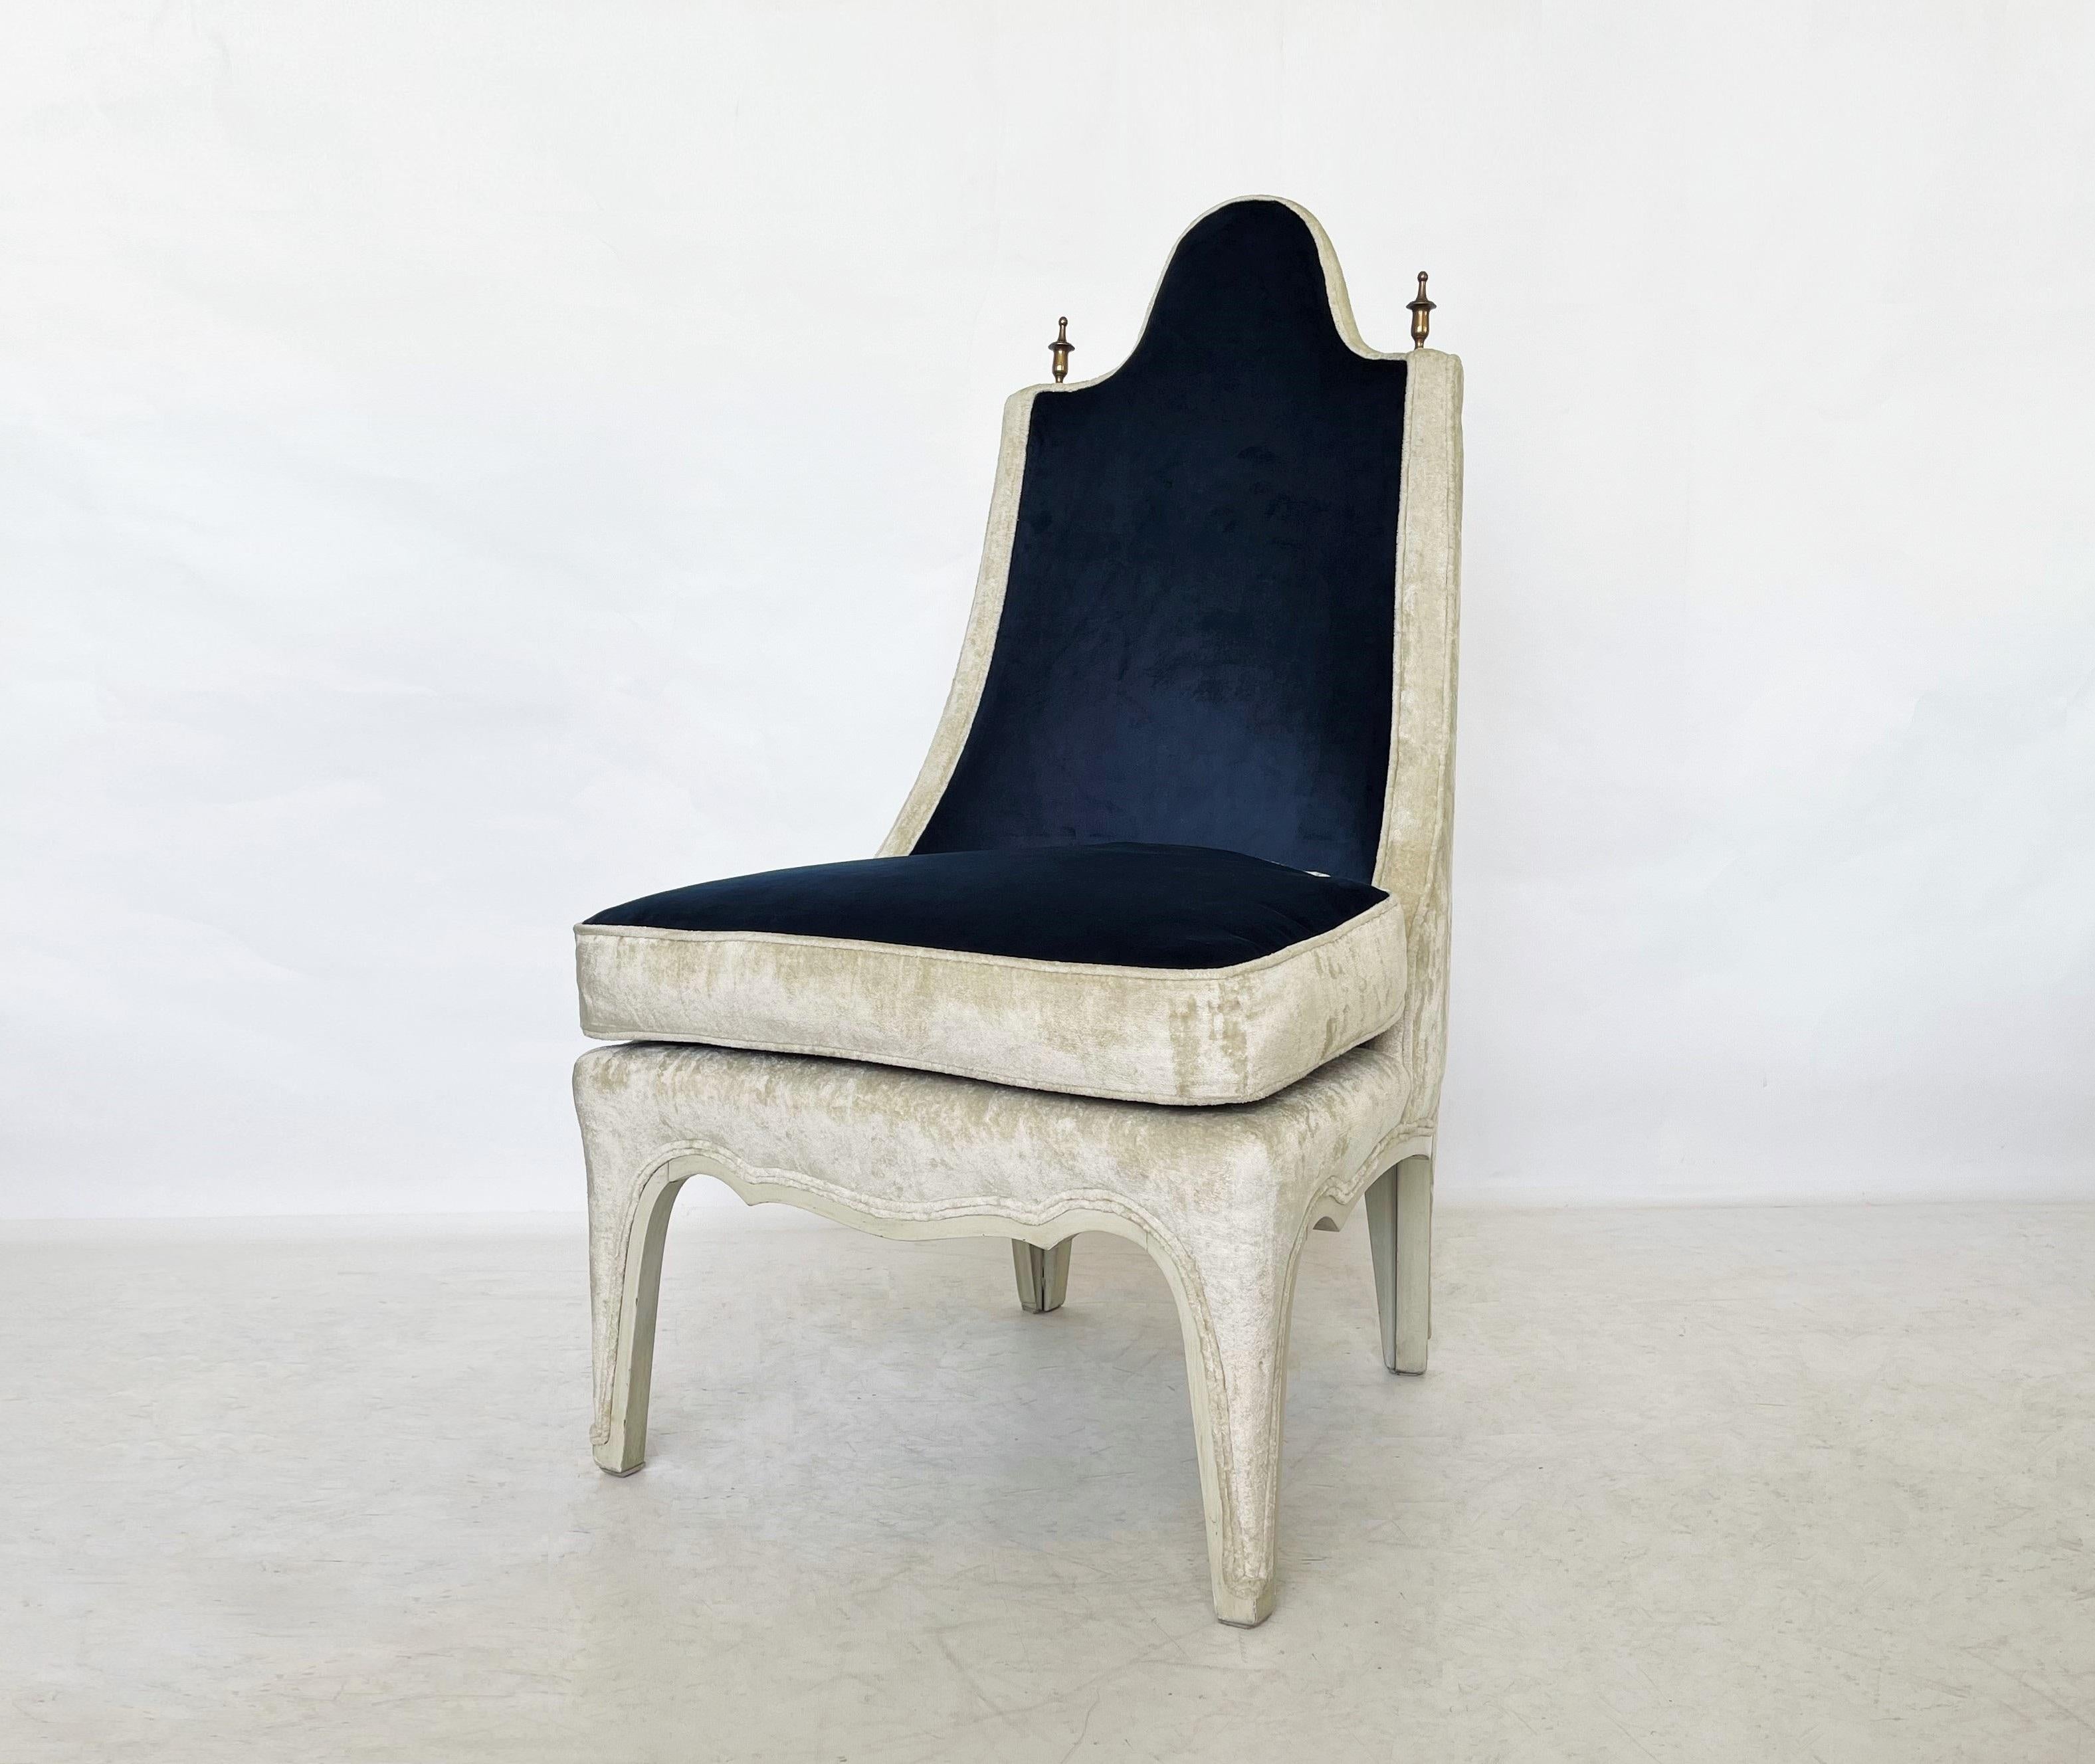 Unusually designed side or slipper chairs, American, 1960s. This stunning set has been recovered in a two-tone blue and cream colored velvet with the legs trimmed in painted wood and accented by tall brass finials on top of each side of the chair